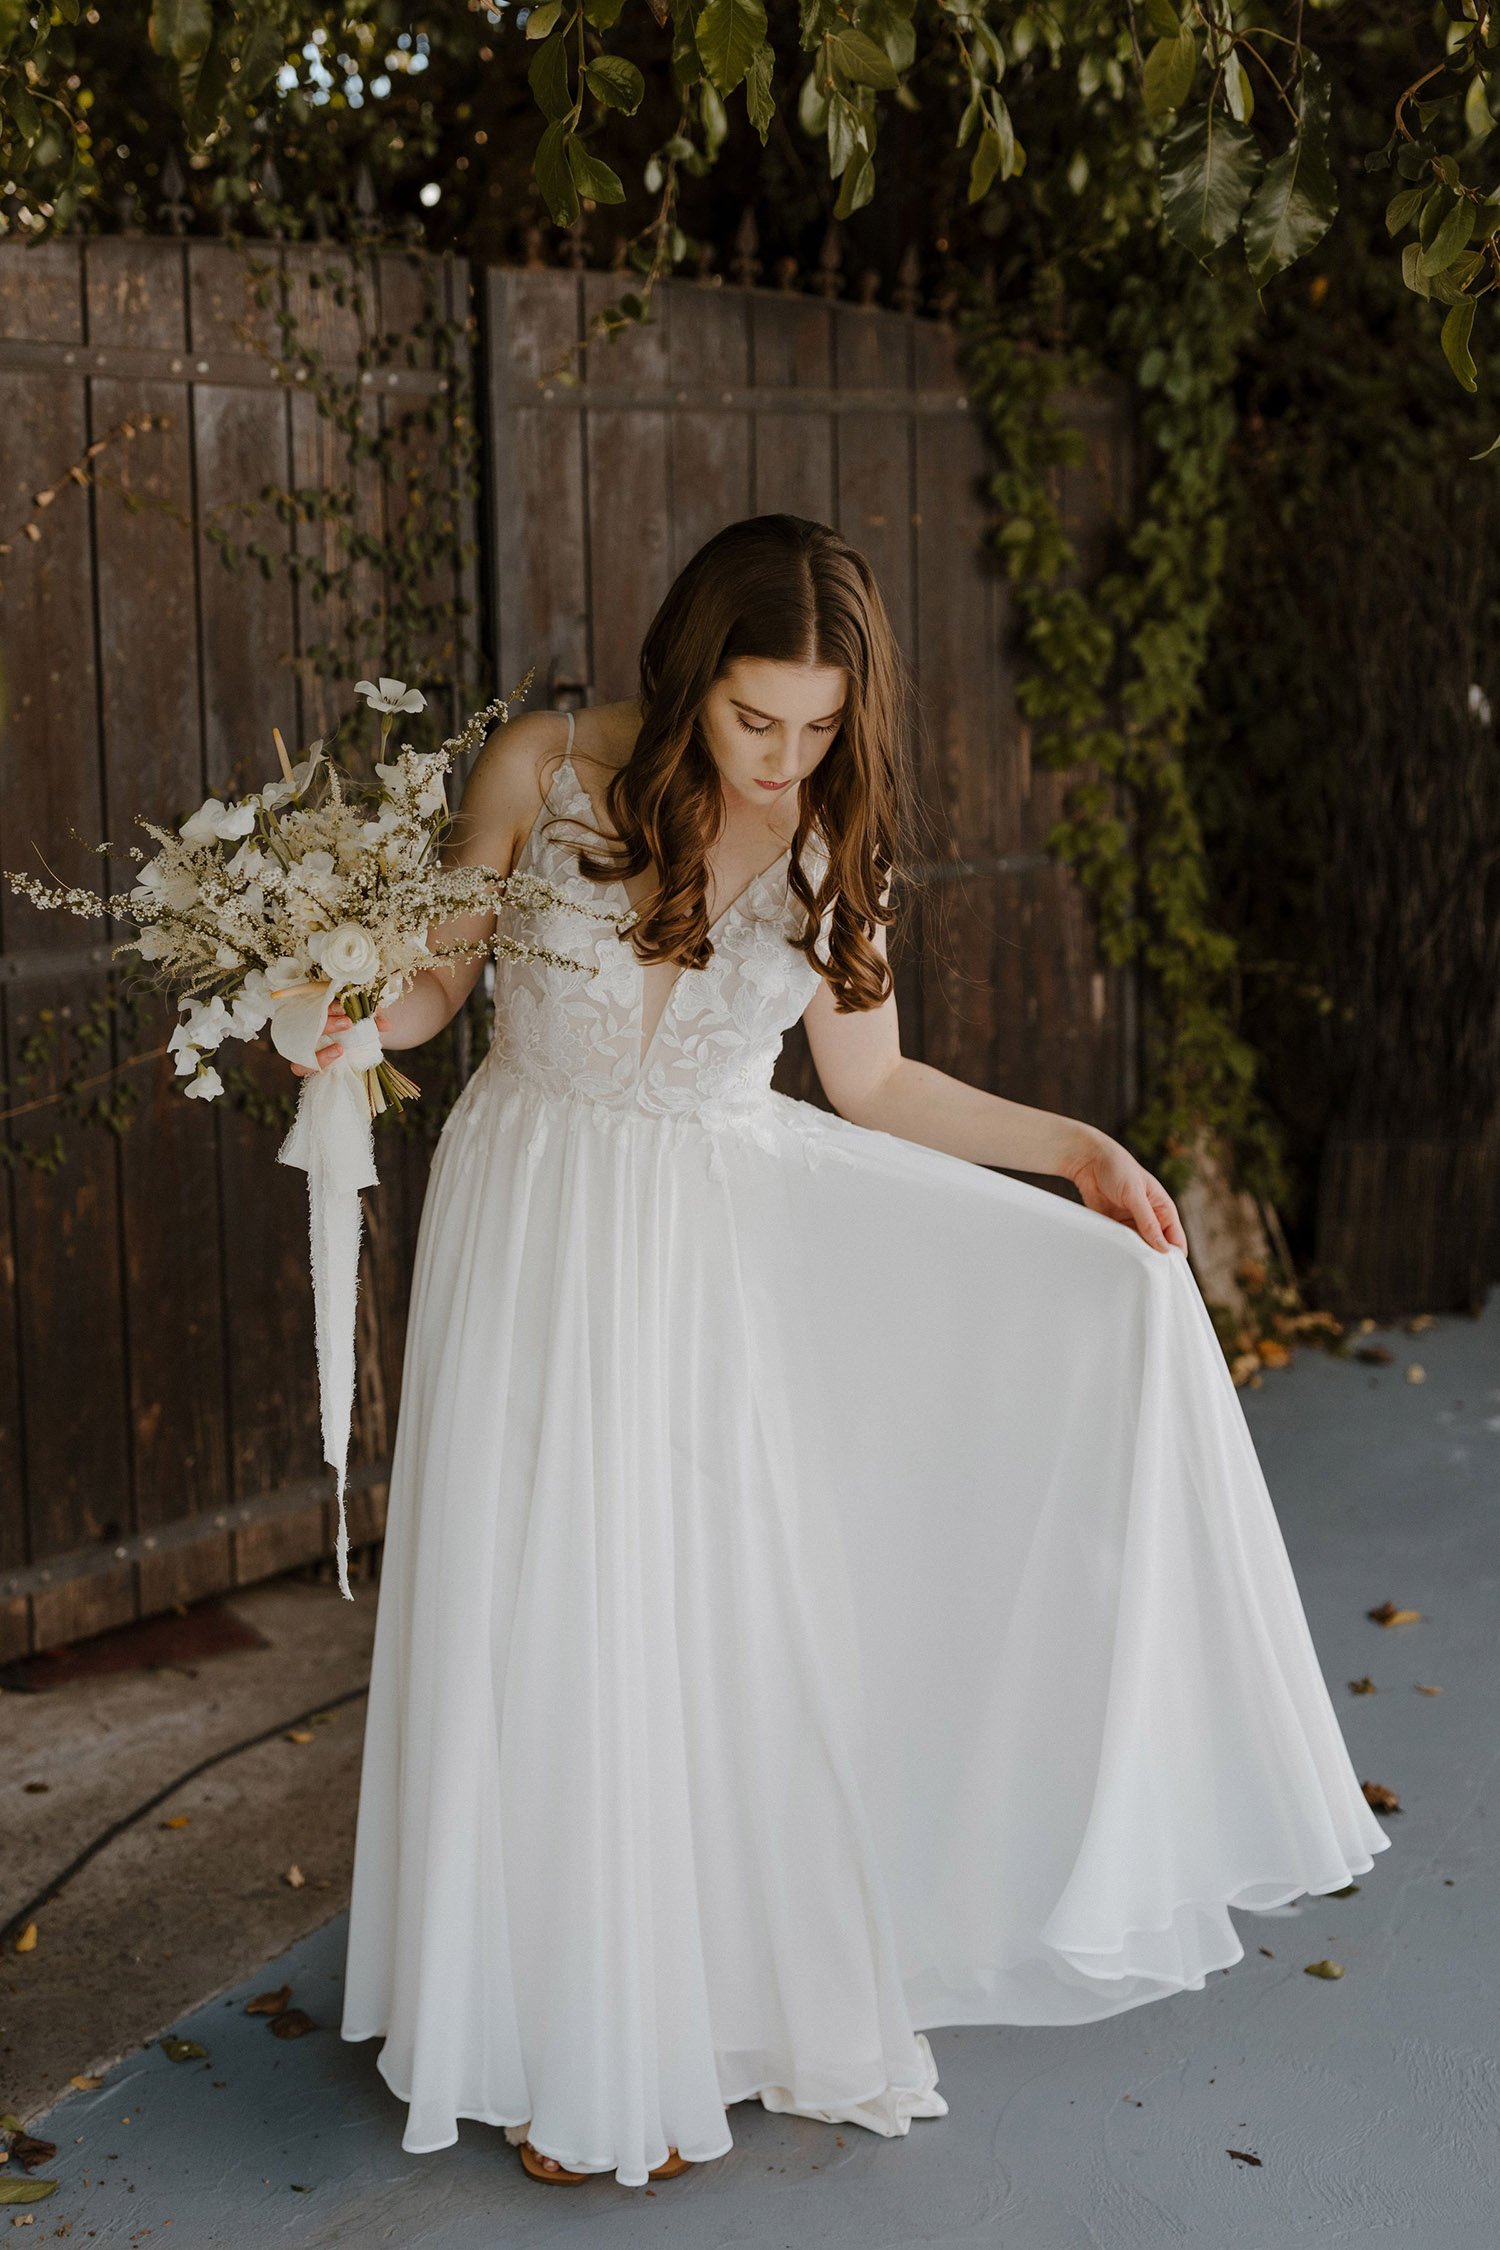 WHIMSICAL WEDDING DRESSES FOR AN ENCHANTED FOREST WEDDING THEME!｜a&bé ...